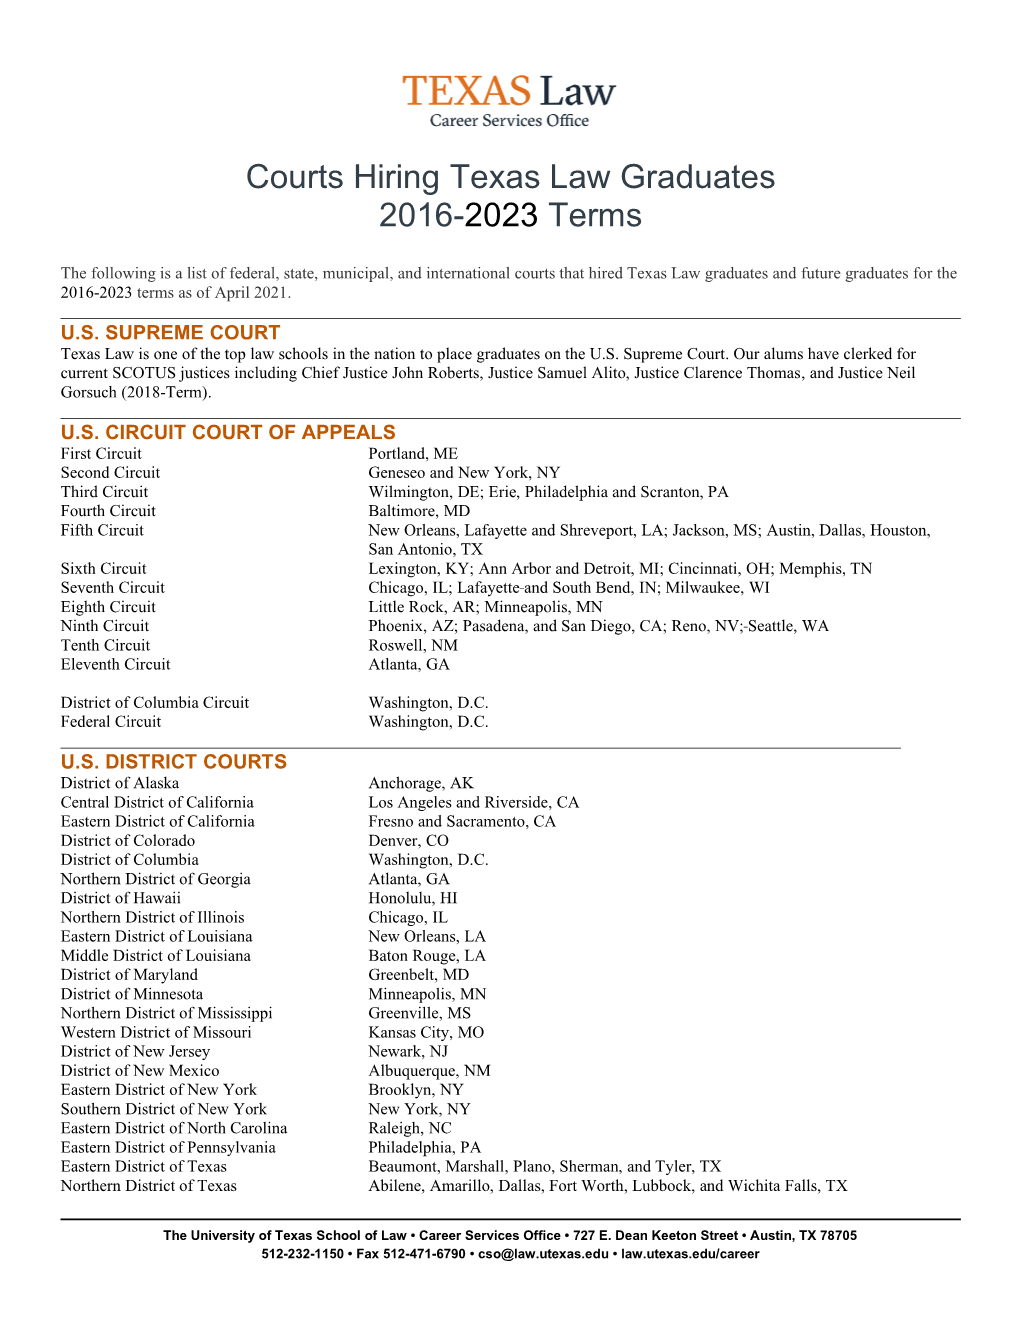 Courts Hiring Texas Law Graduates 2016-2023 Terms